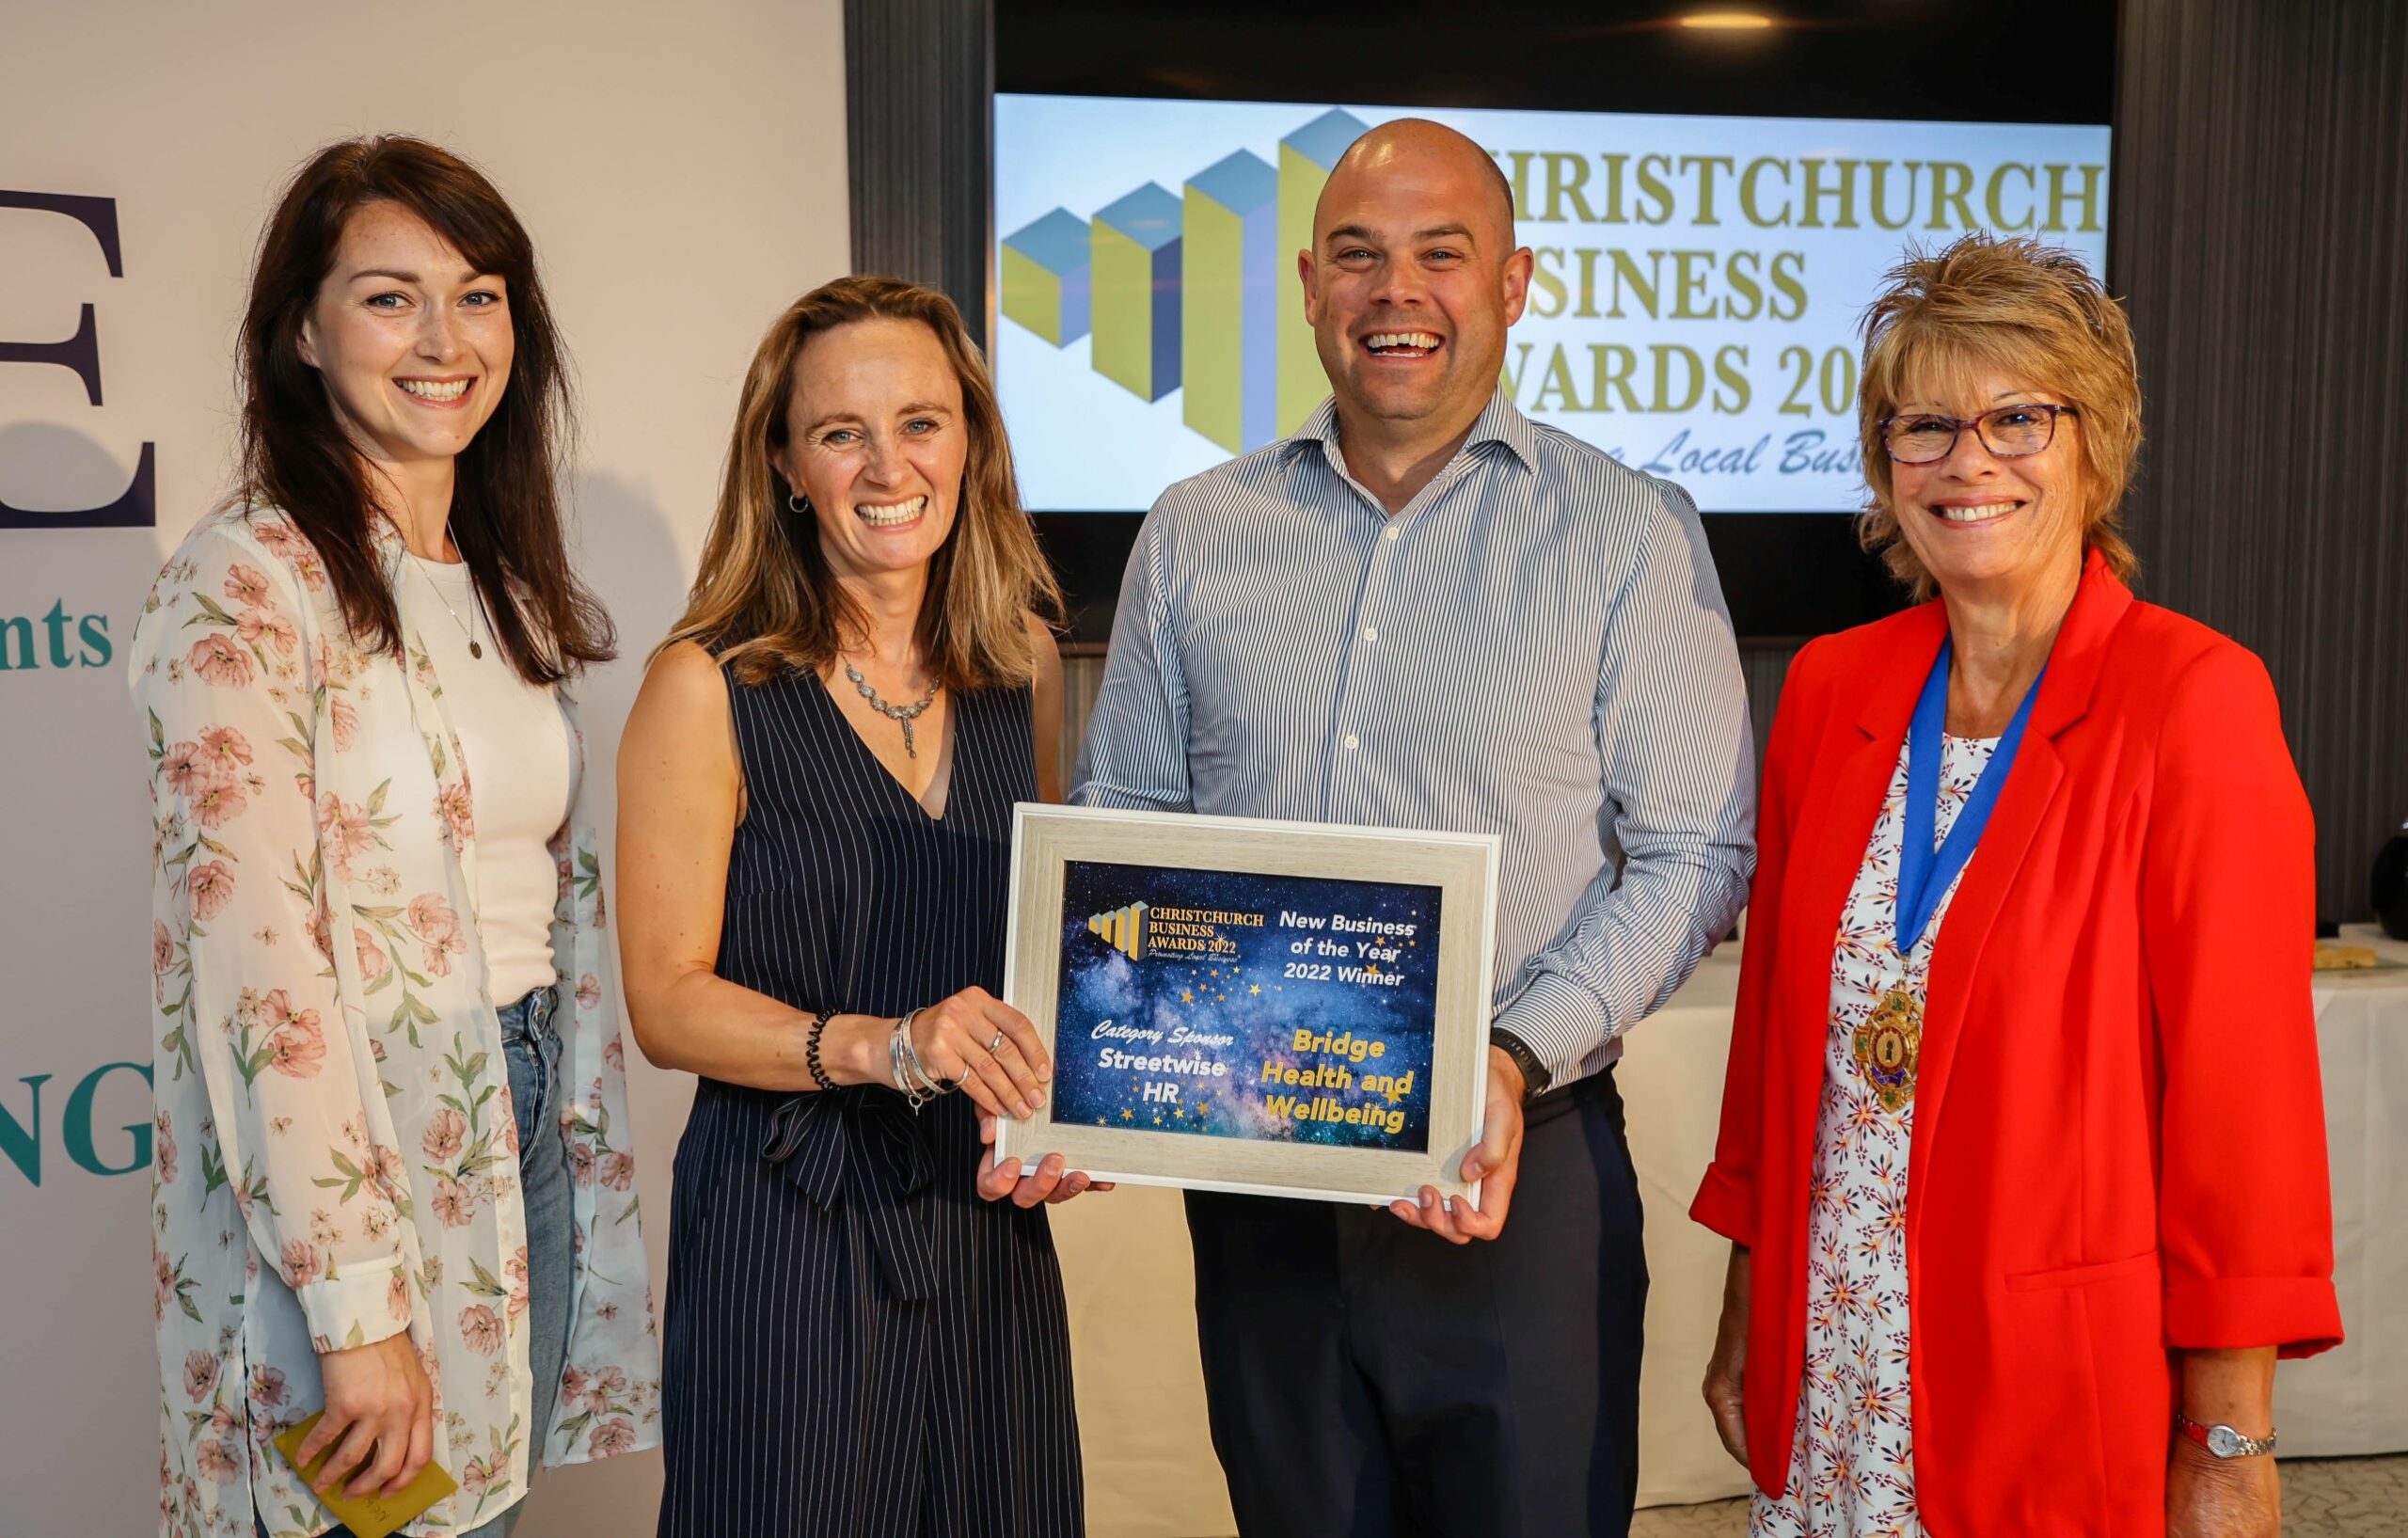 Christchurch Business Awards Winners Bridge Health and Wellbeing photo credit Paul Collins.PC Visuals lr scaled